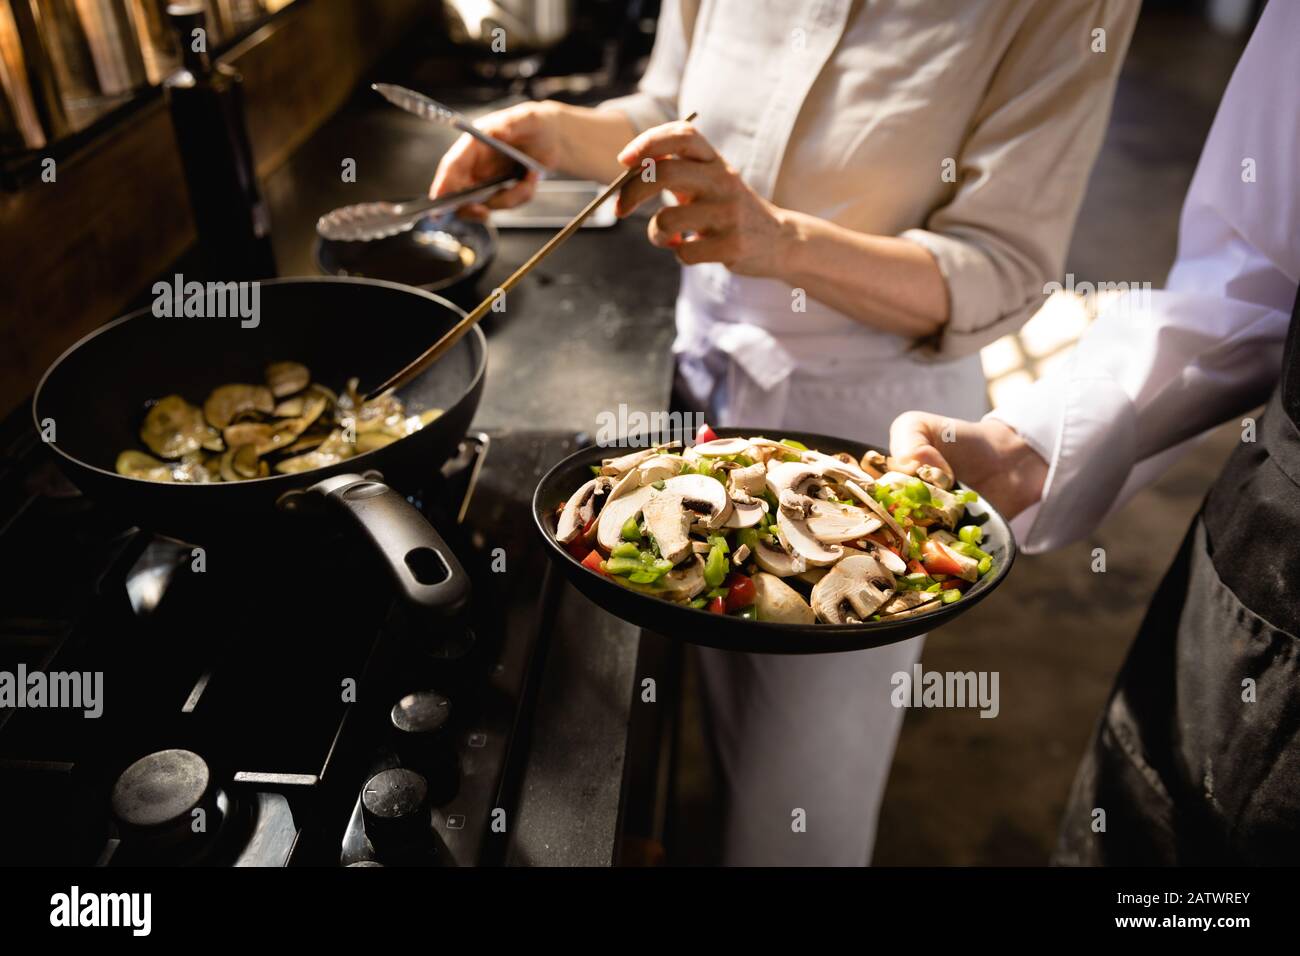 Caucasian chefs cooking vegetables Stock Photo